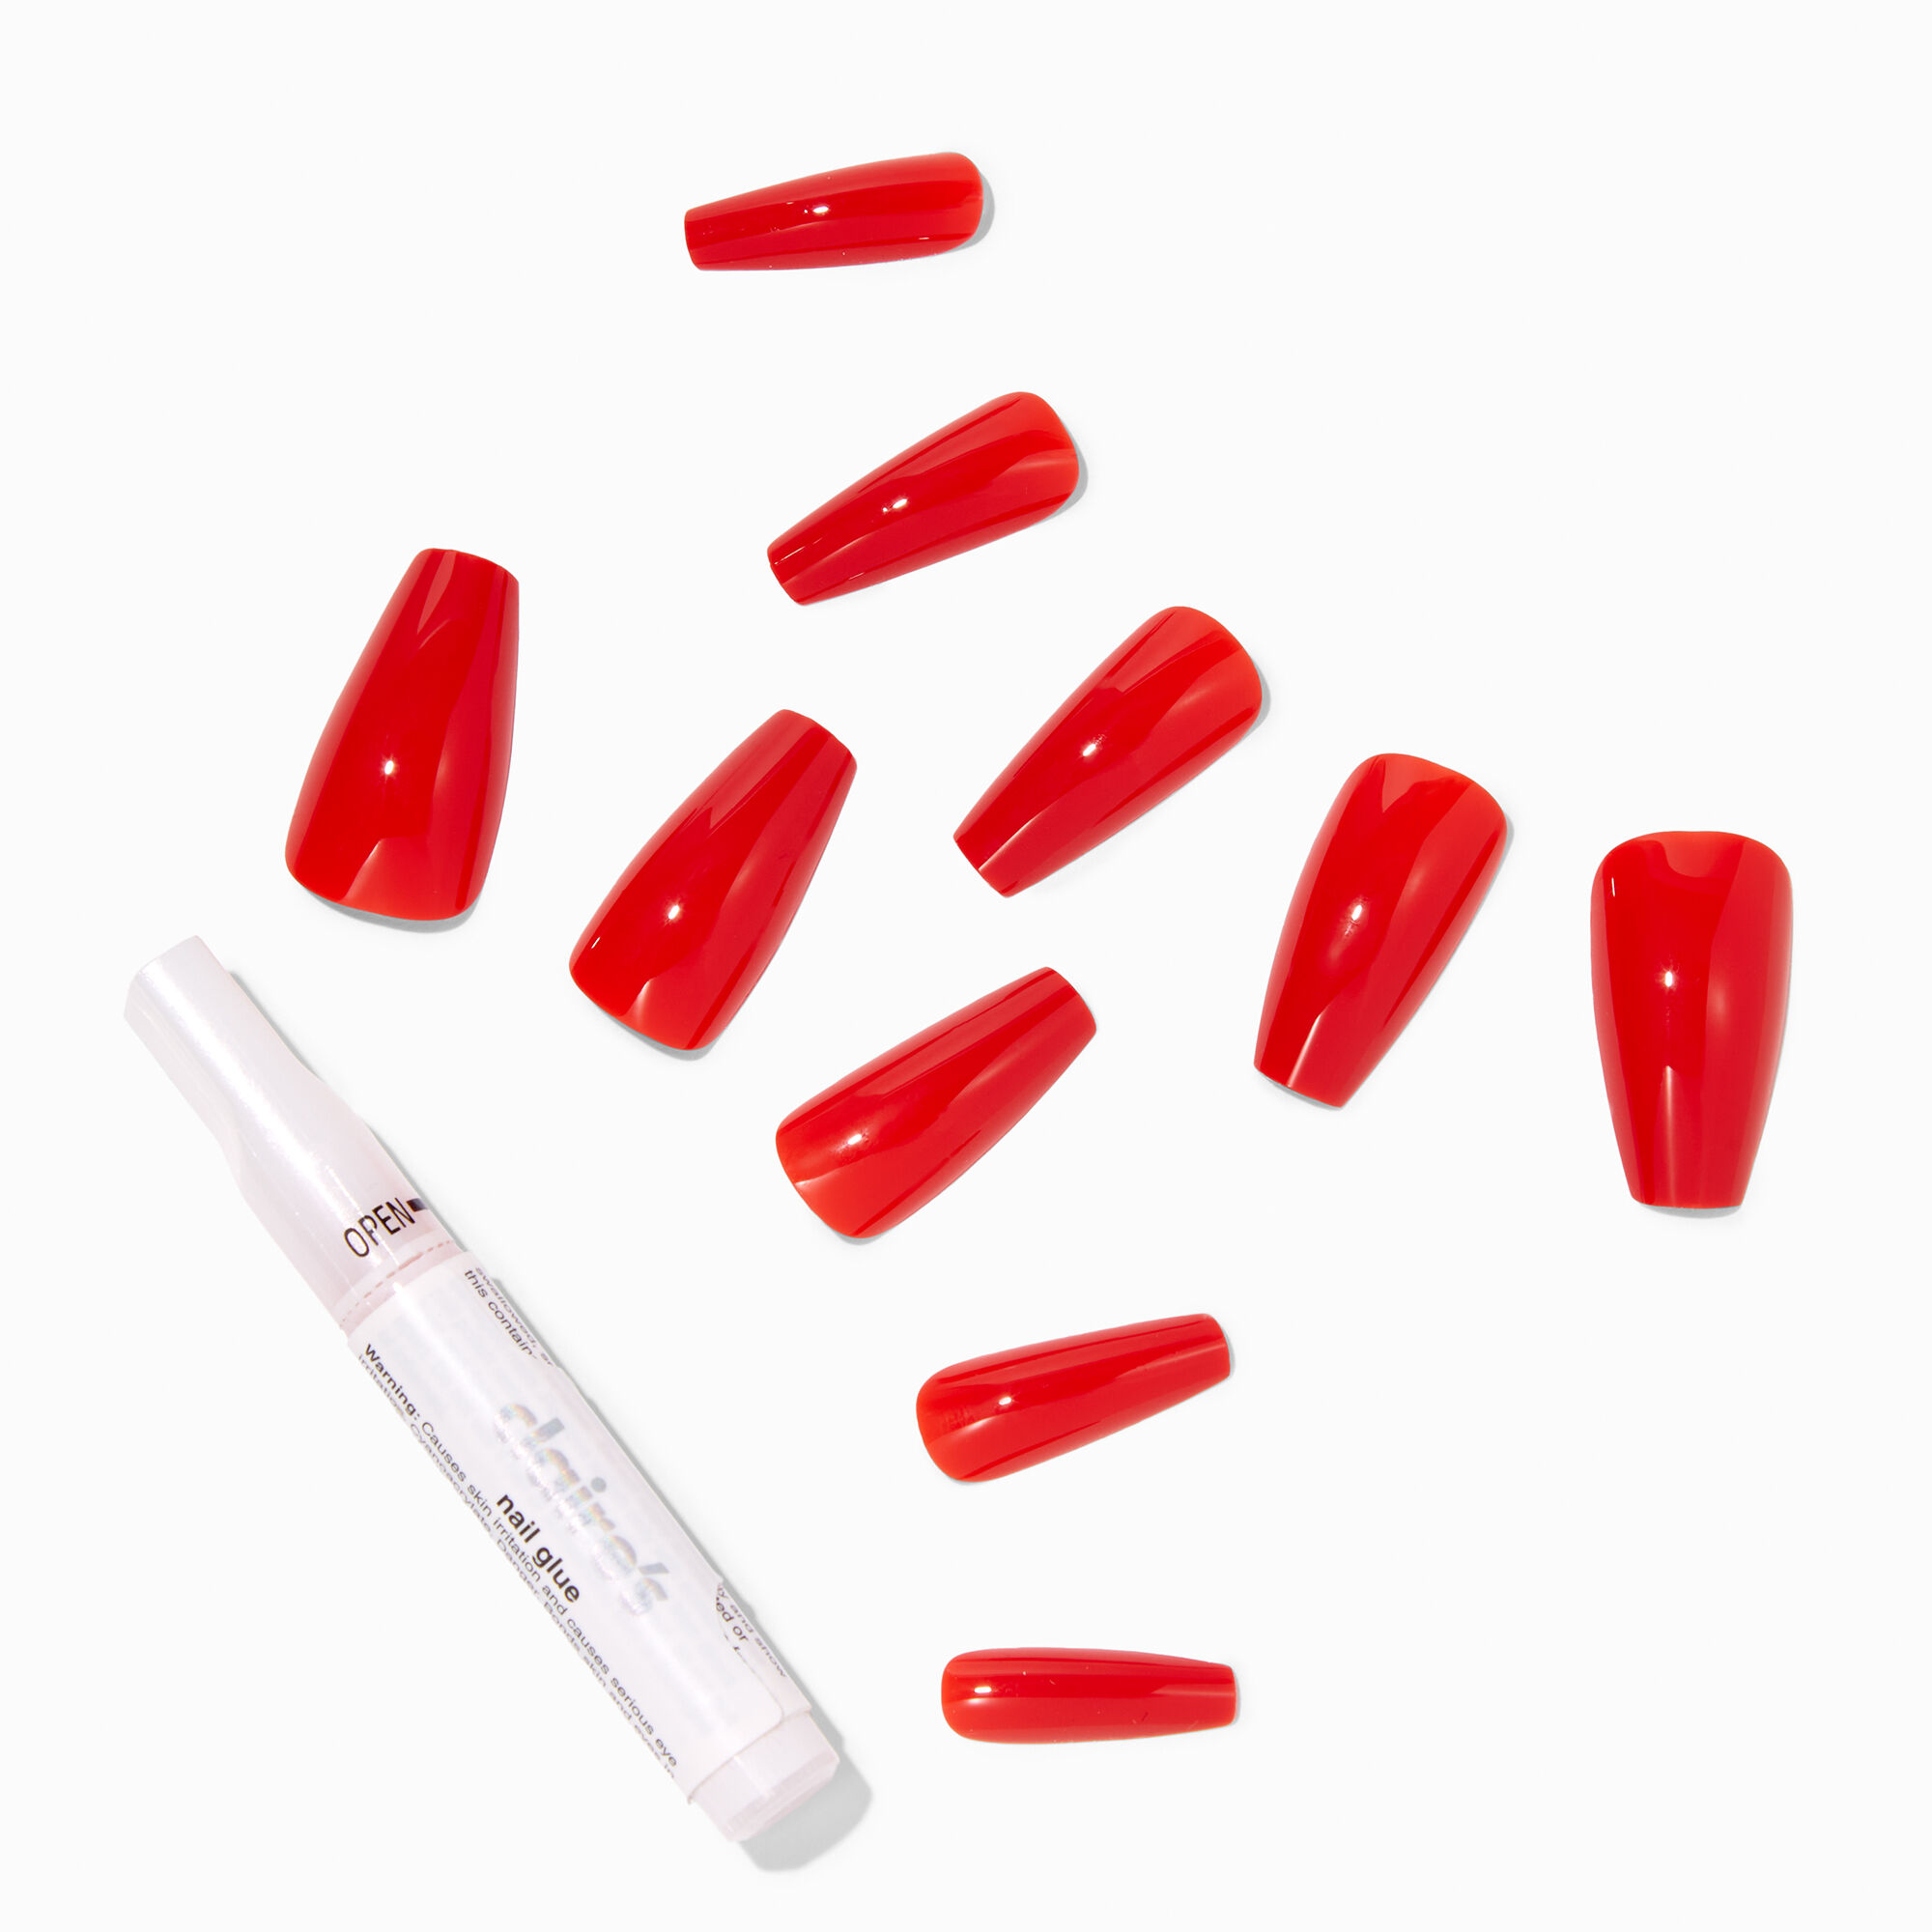 View Claires Glossy Squareletto Vegan Faux Nail Set 24 Pack Red information